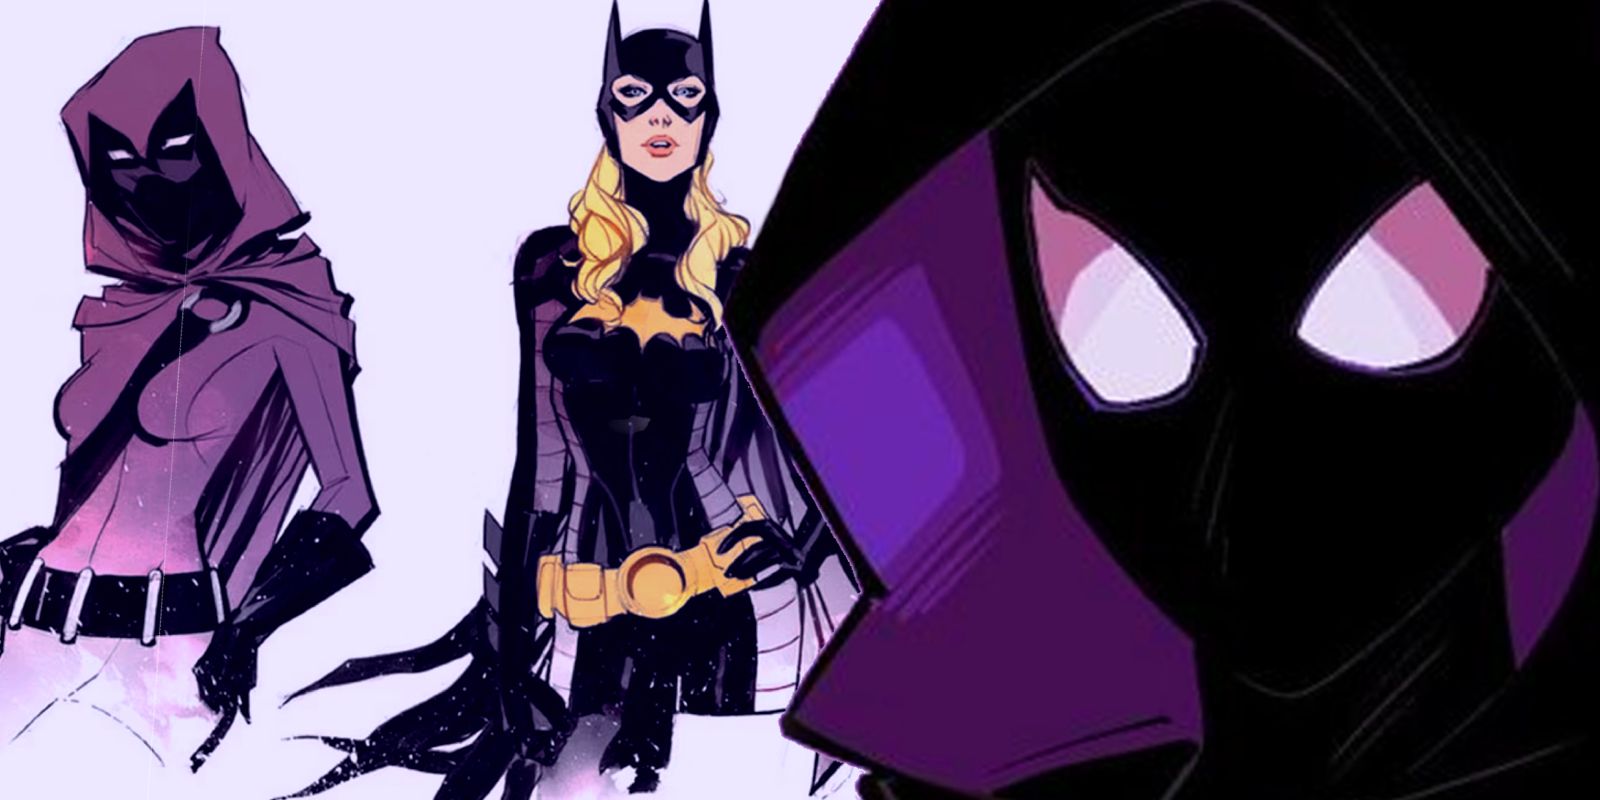 Three versions of Stephanie Brown standing together, including her Spoiler and Batgirl costumes.